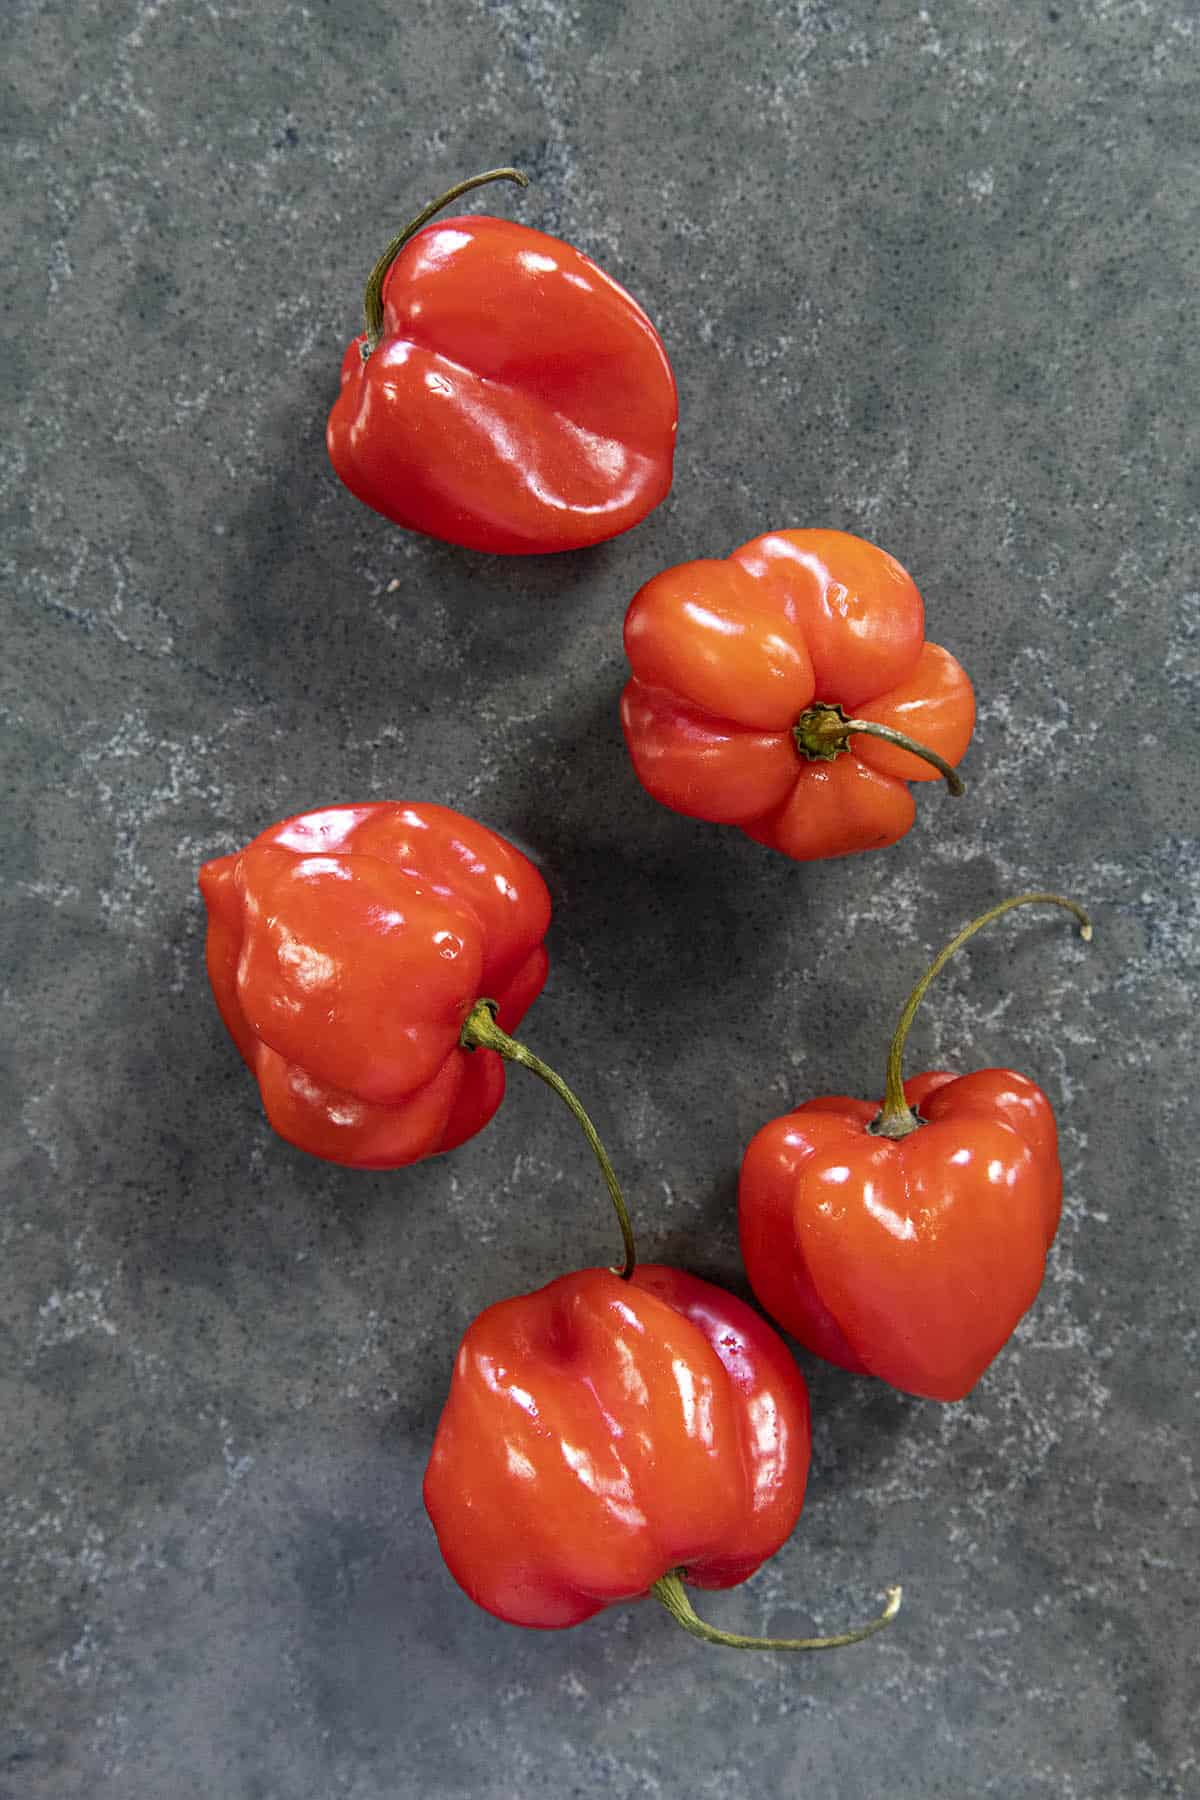 Caribbean red habanero peppers for making Habanero Hot Sauce